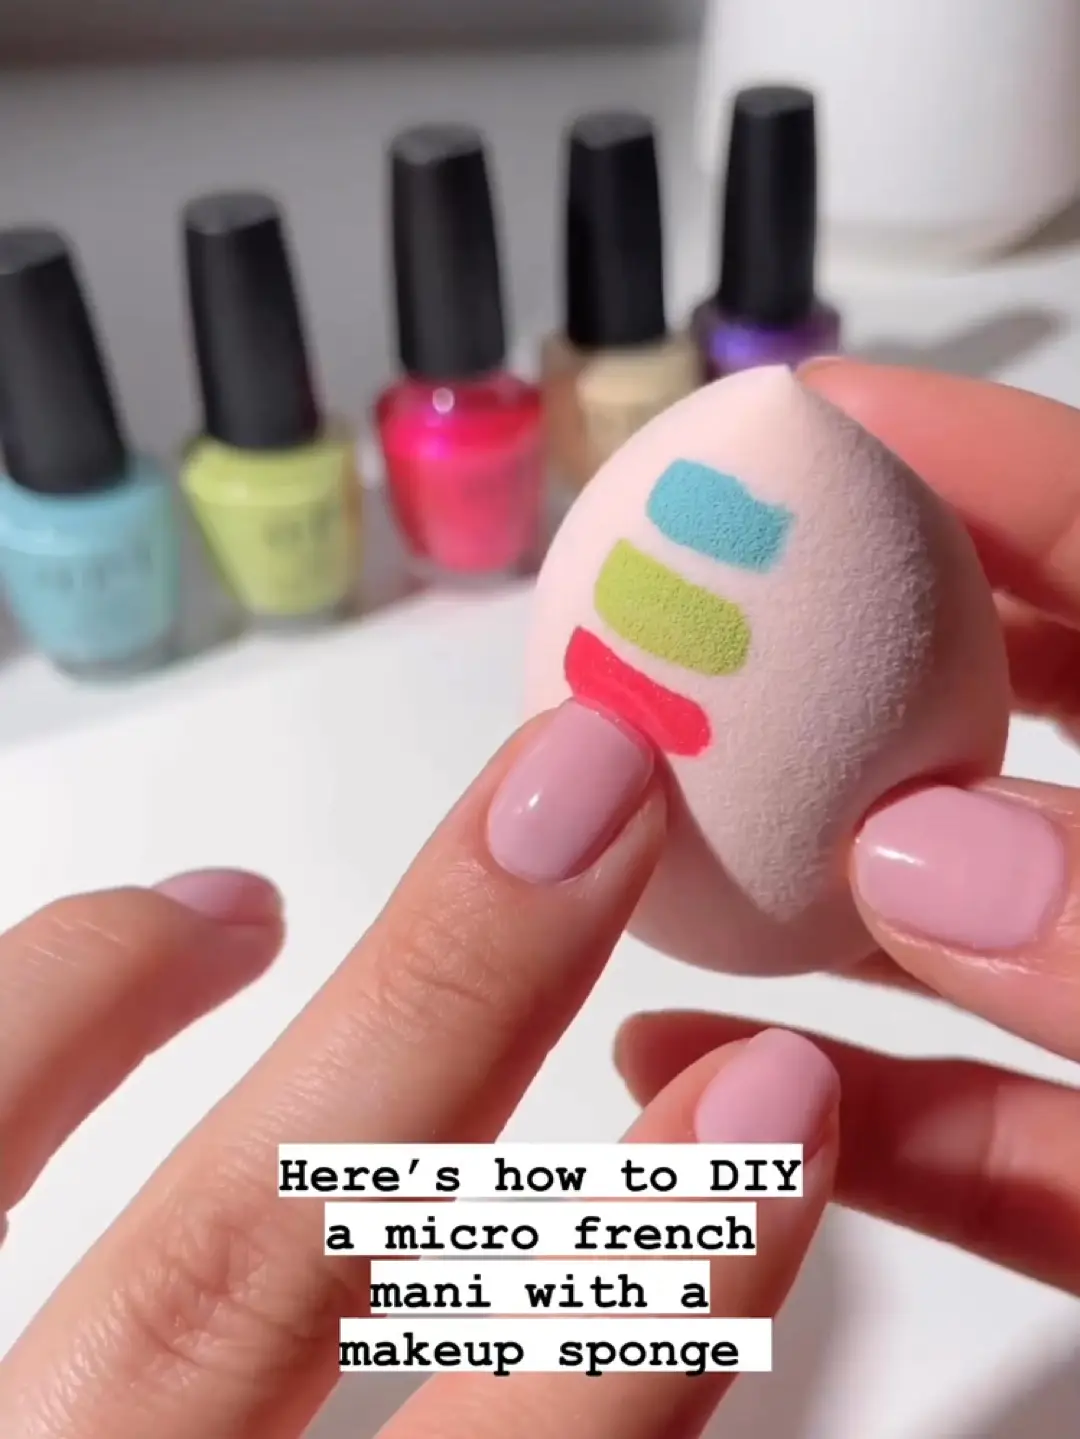 Nail Hack: Micro French Nails using Makeup Sponge, Video published by OPI